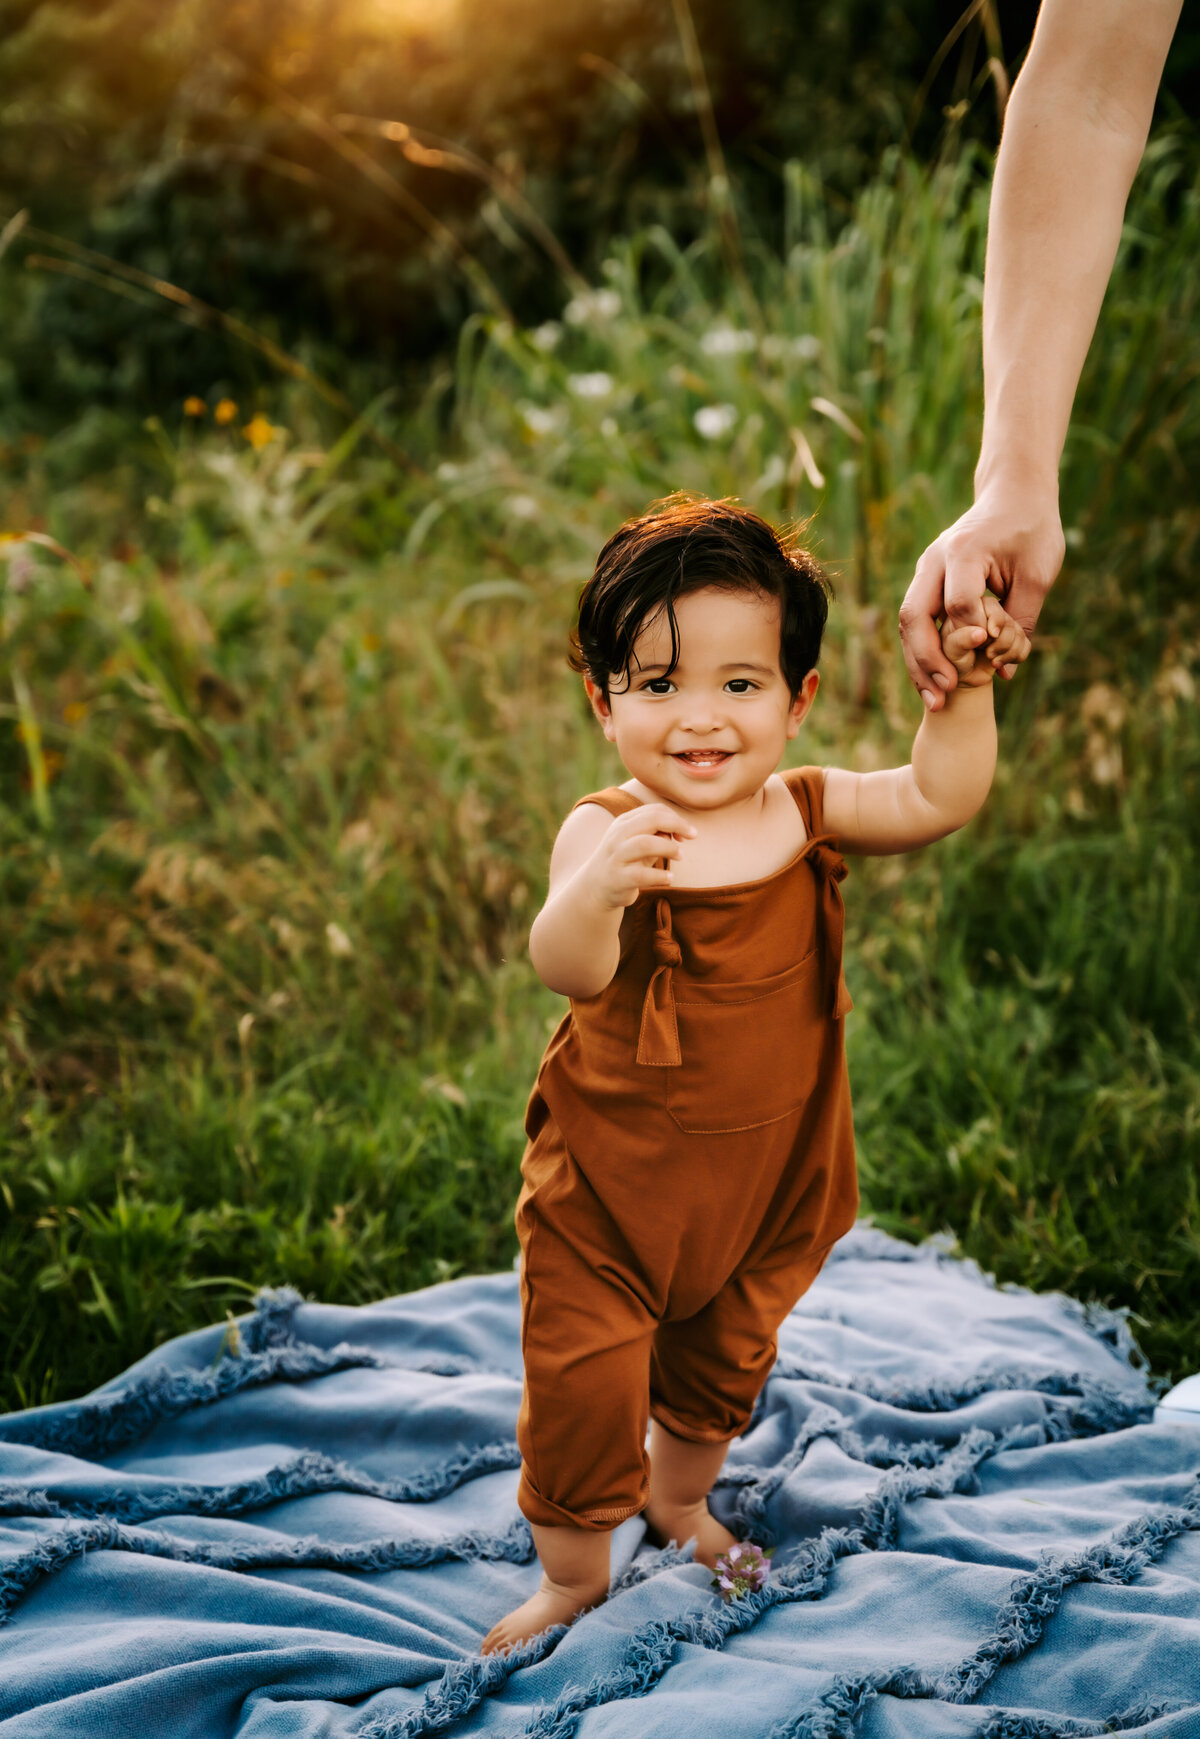 family photographer, a baby boy smiles standing on a picnic blanket with dad's help